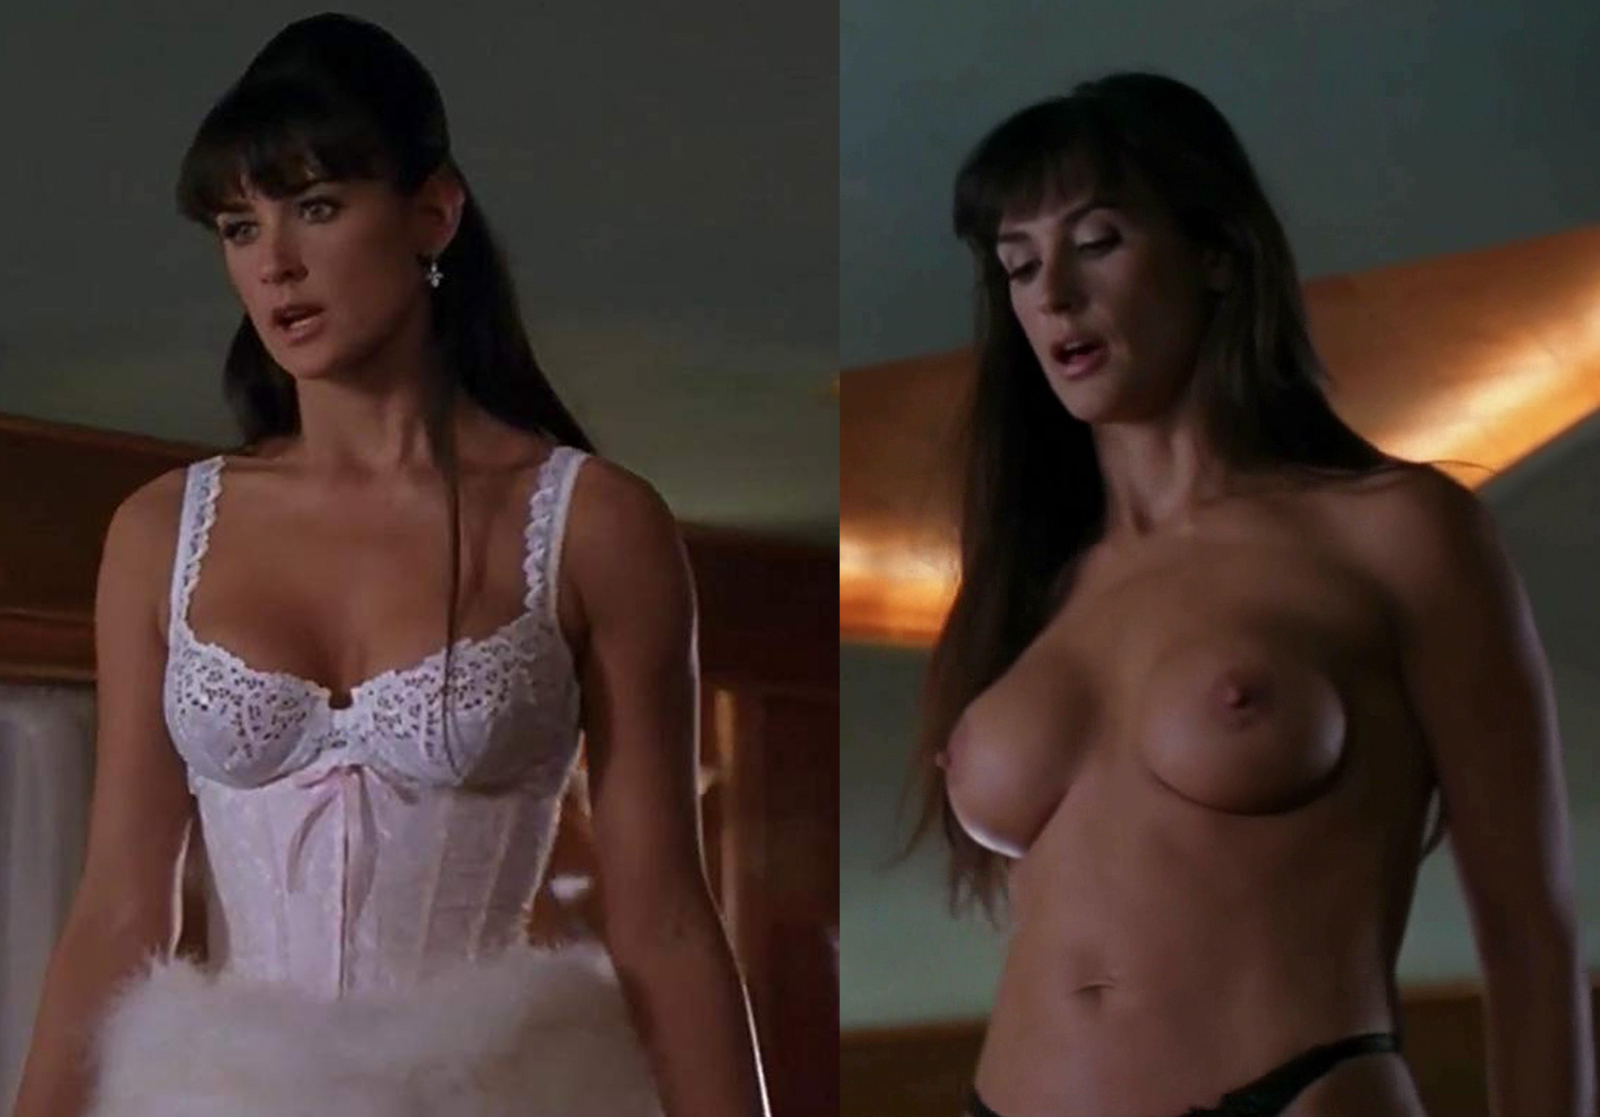 naked pics of catherine bell